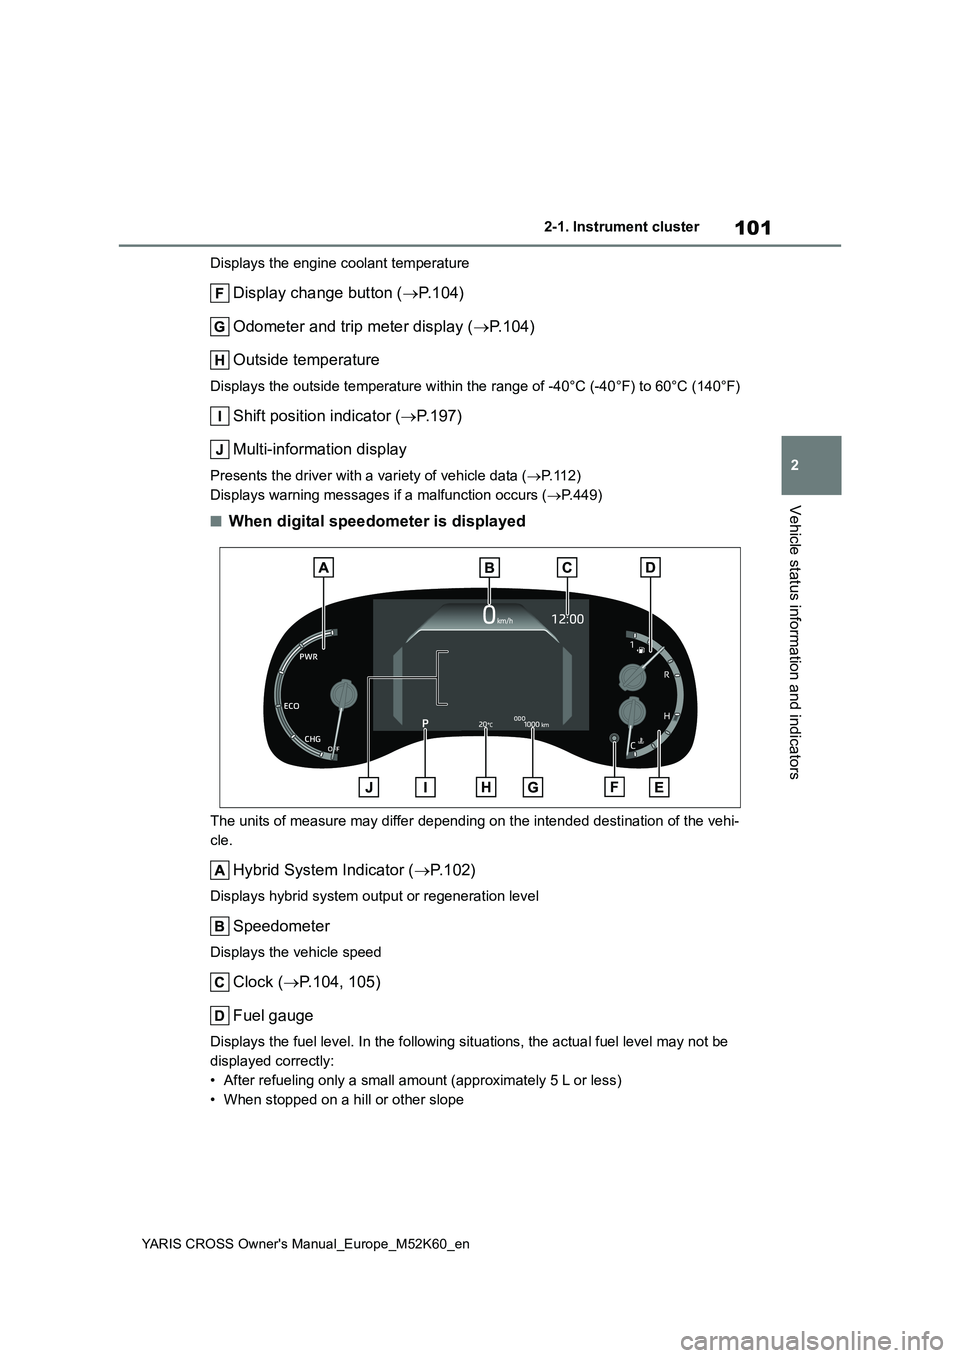 TOYOTA YARIS CROSS 2021  Owners Manual 101
2
YARIS CROSS Owner's Manual_Europe_M52K60_en
2-1. Instrument cluster
Vehicle status information and indicators
Displays the engine coolant temperature
Display change button (P. 1 0 4 ) 
Od